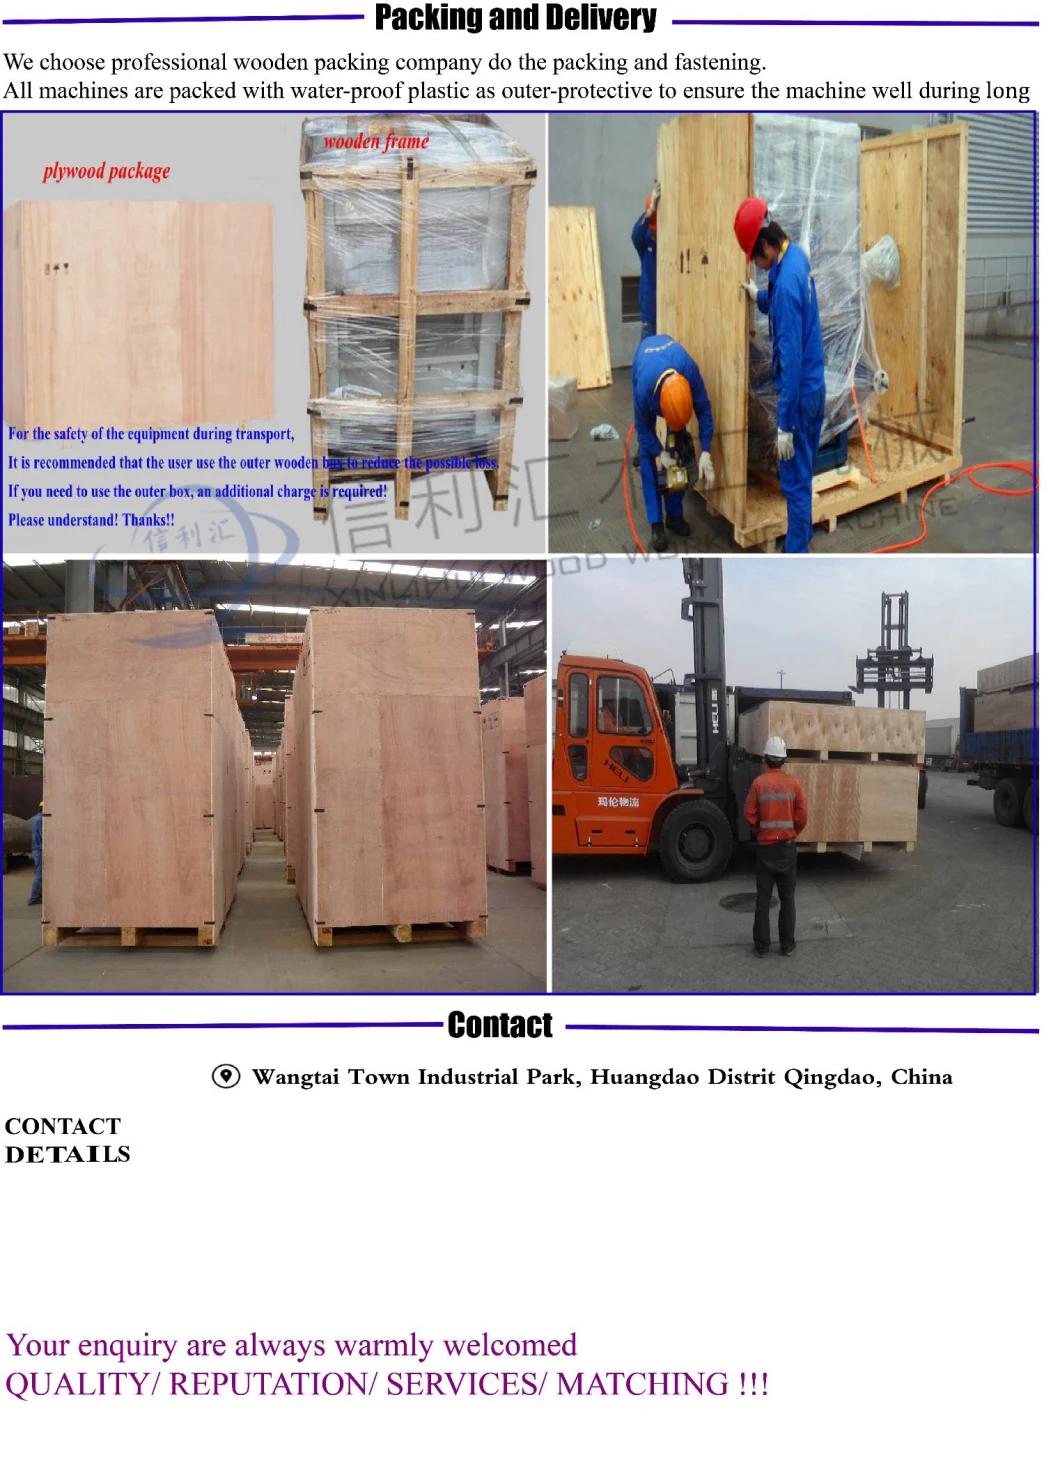 Hydraulic Double Side Hydraulic Composer/ 4 Sides Rotary Hydraulic Clamp Carrier for Modular House, Wooden House Prefabricated House, Prefabricated Building